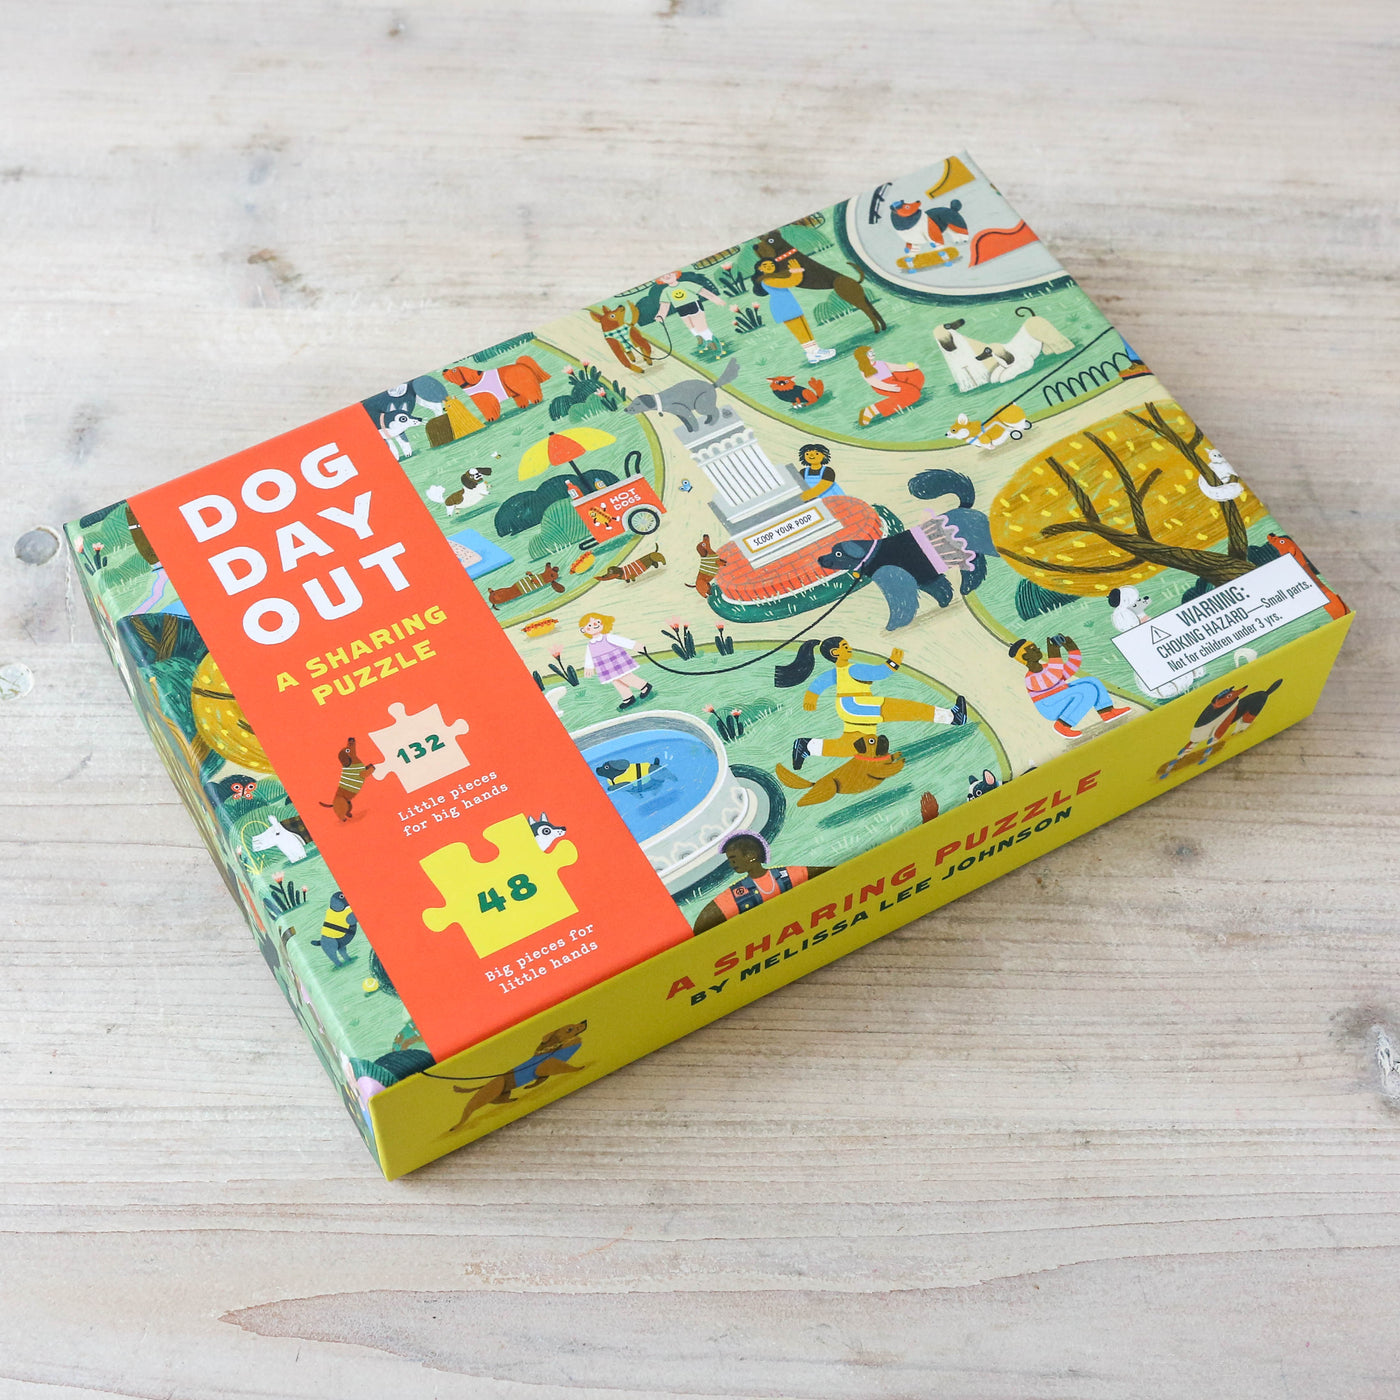 Dog Day Out! : A Sharing Puzzle for Kids and Grownups